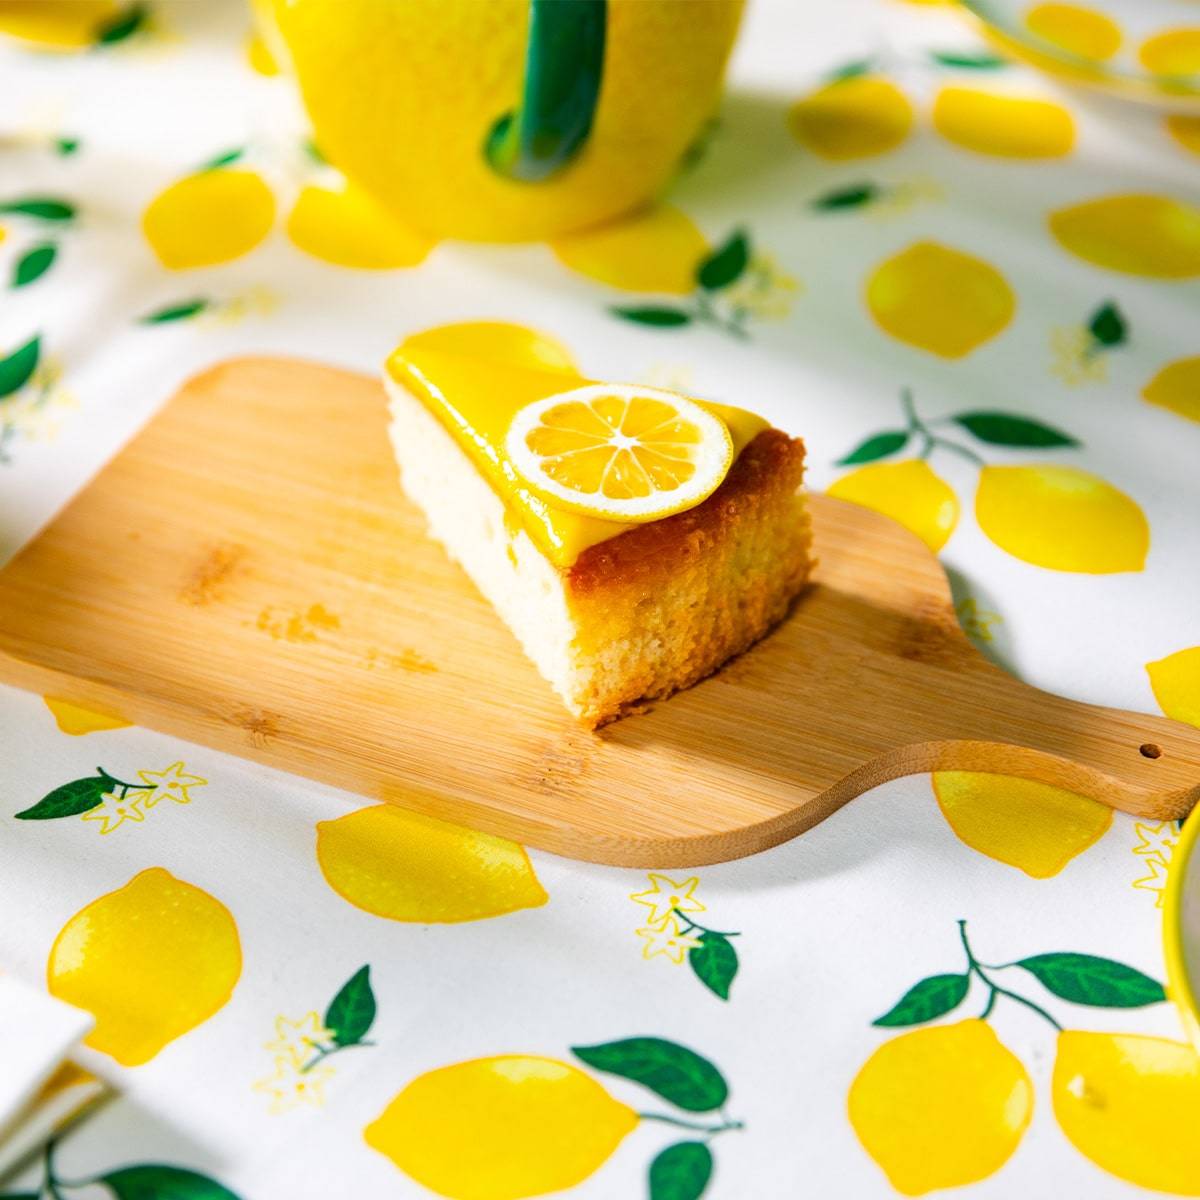 A delectable slice of lemon cake topped with a thin lemon slice, resting on a bamboo cutting board. The cake and board are set against a vibrant background featuring a lemon-print tablecloth, complementing the theme with scattered lemon illustrations and green leaves, creating a fresh and appealing summer dessert setup.